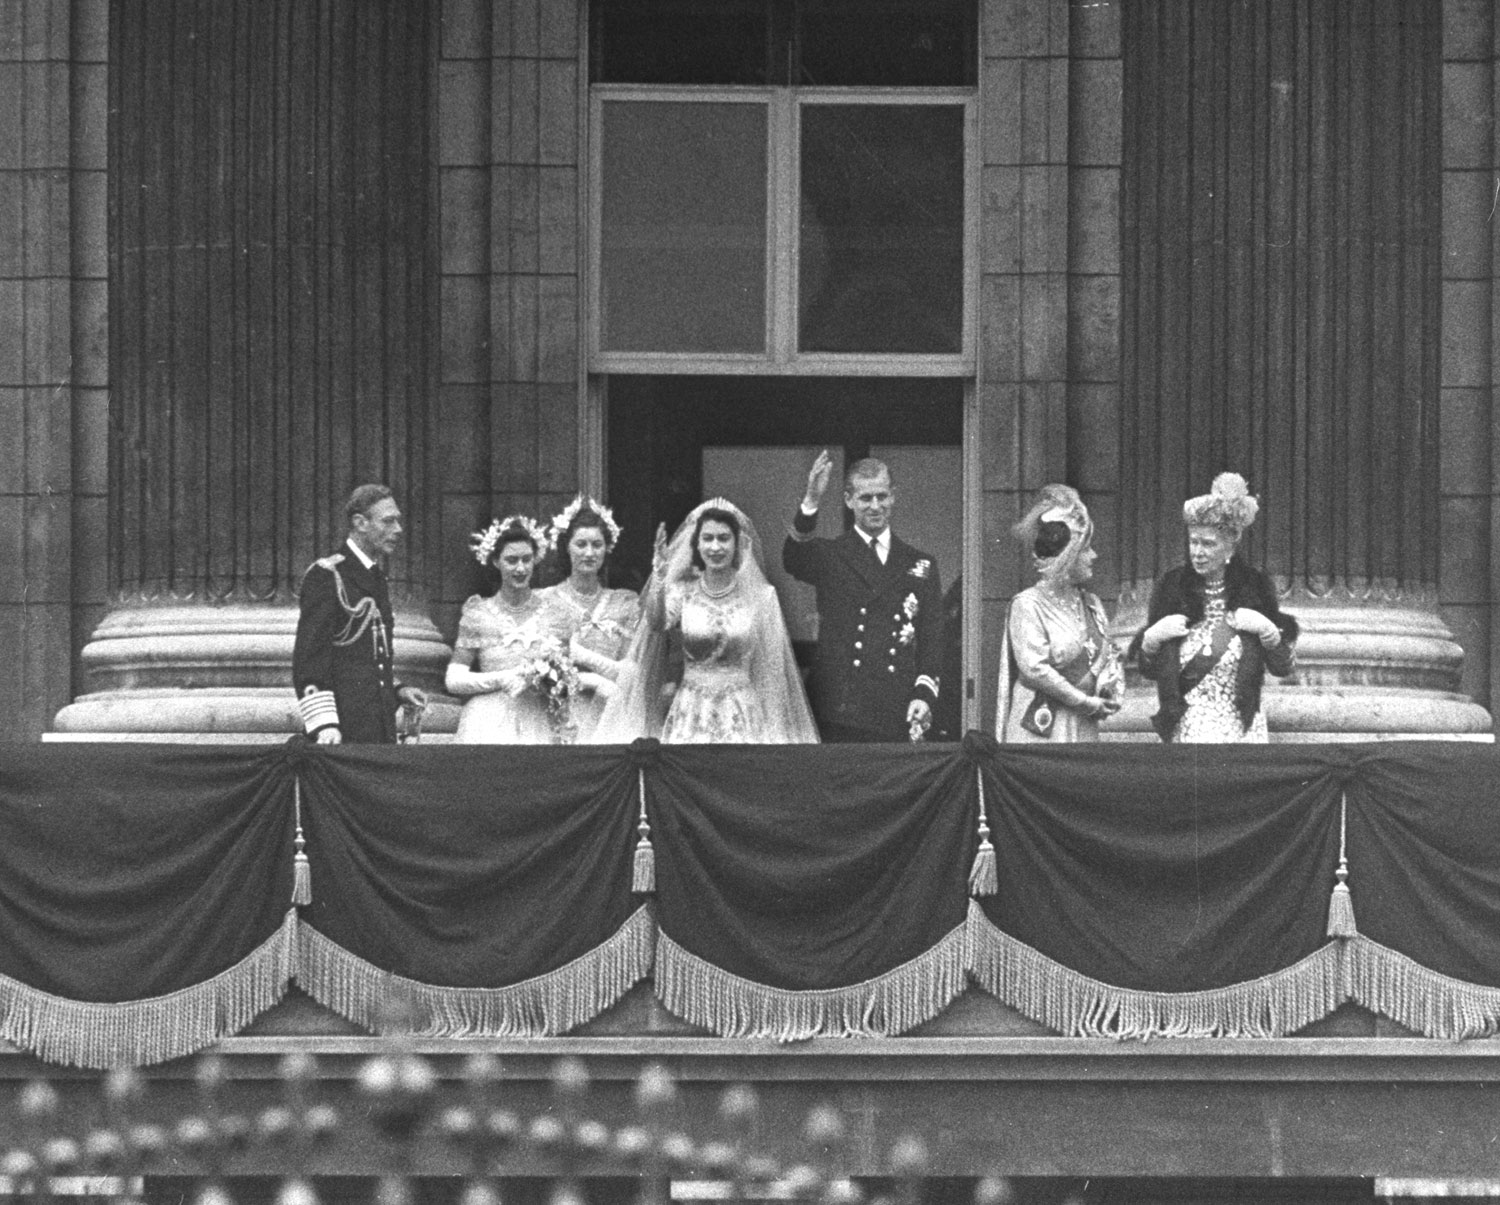 Royals on the balcony of Buckingham Palace: (l. to r.) King George VI, Princess Margaret Rose, unidentified, Princess Elizabeth, Prince Philip, Queen Elizabeth and Queen Mother Mary after wedding of Elizabeth and Philip.